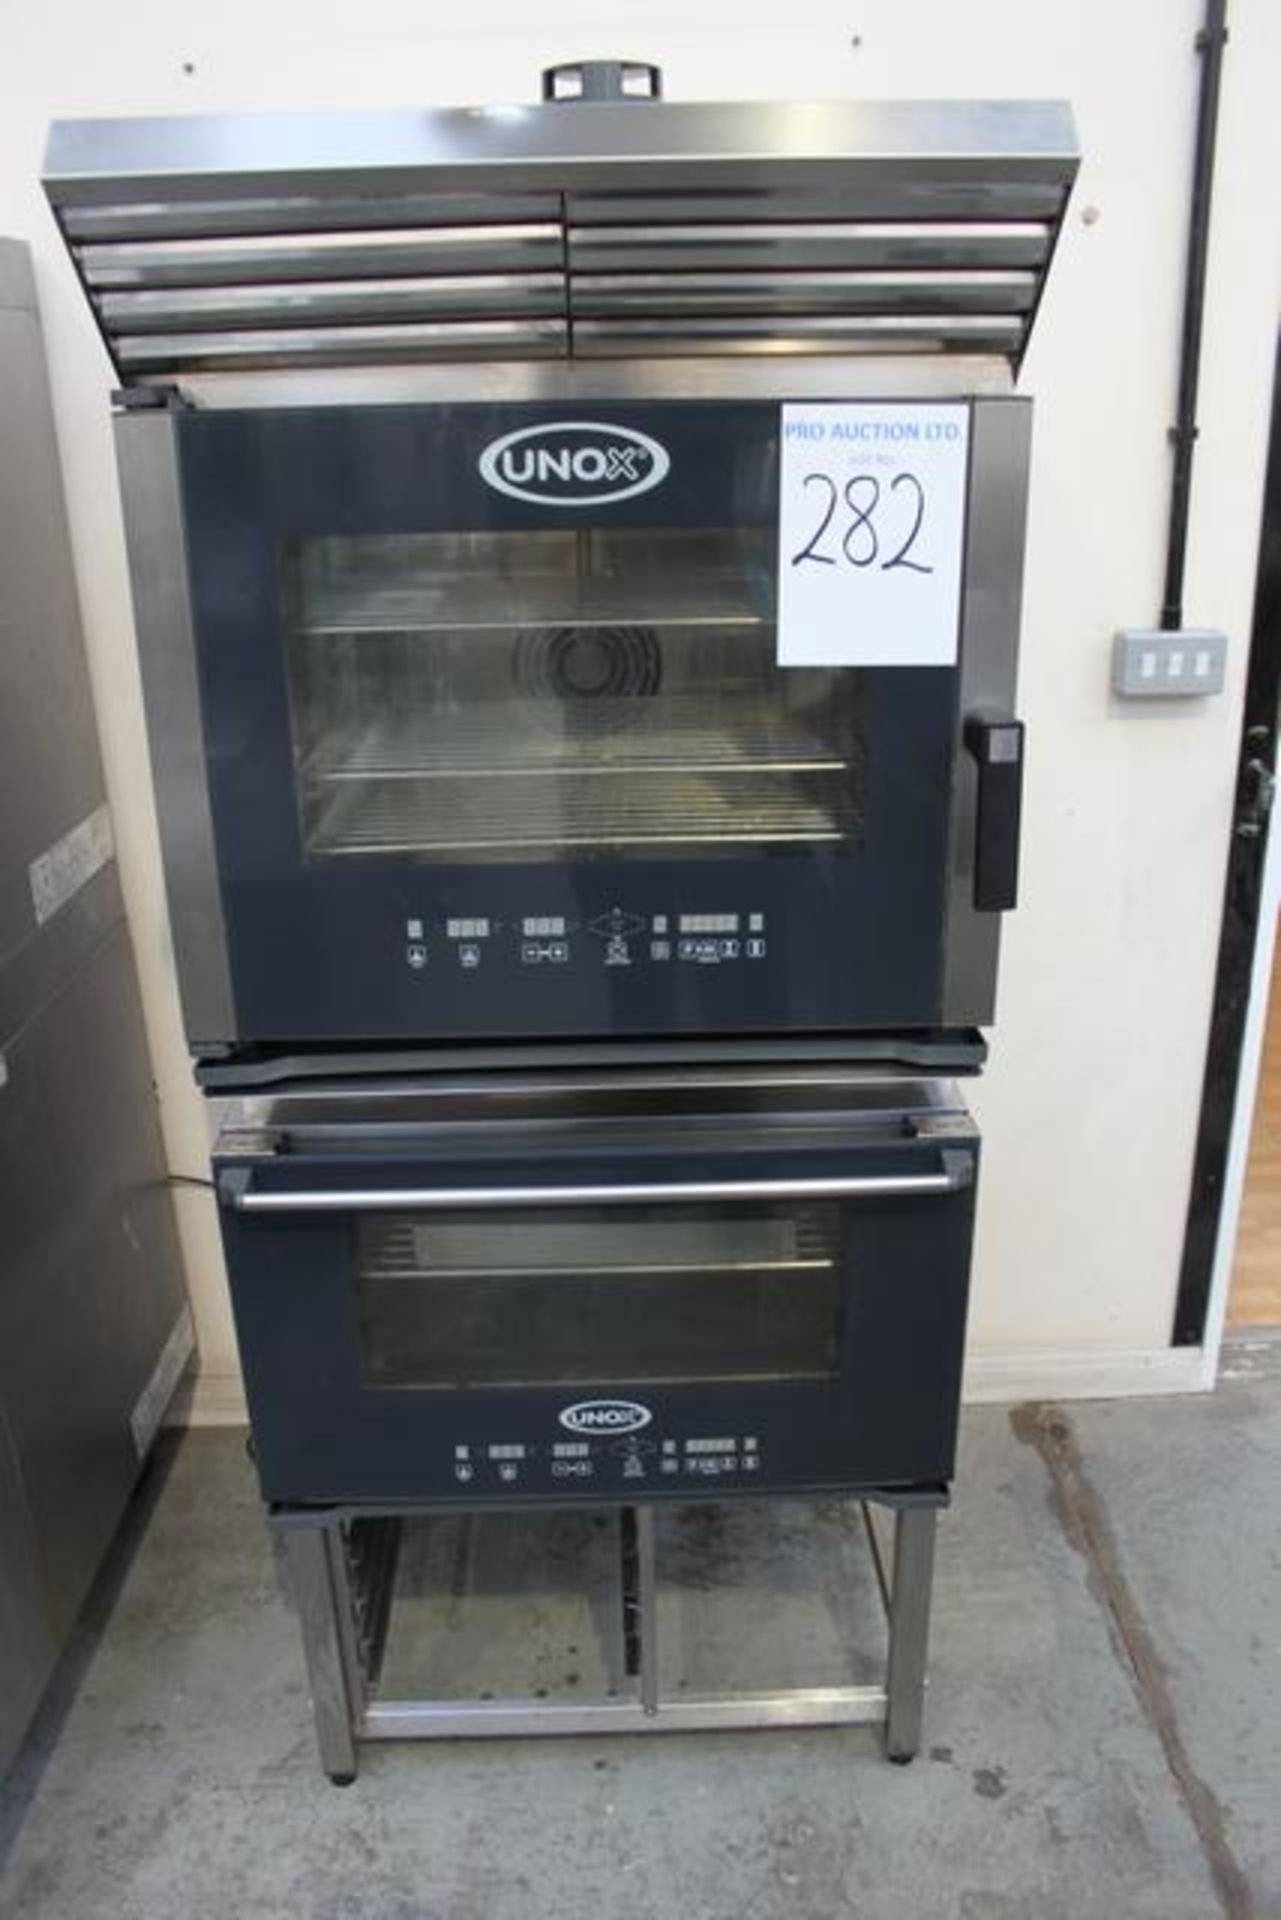 Unox ChefTop XVC305 Evolution combi-steamer pack 5 x 1/1 GN and 3 x 1/1 GN digital control - Image 3 of 3